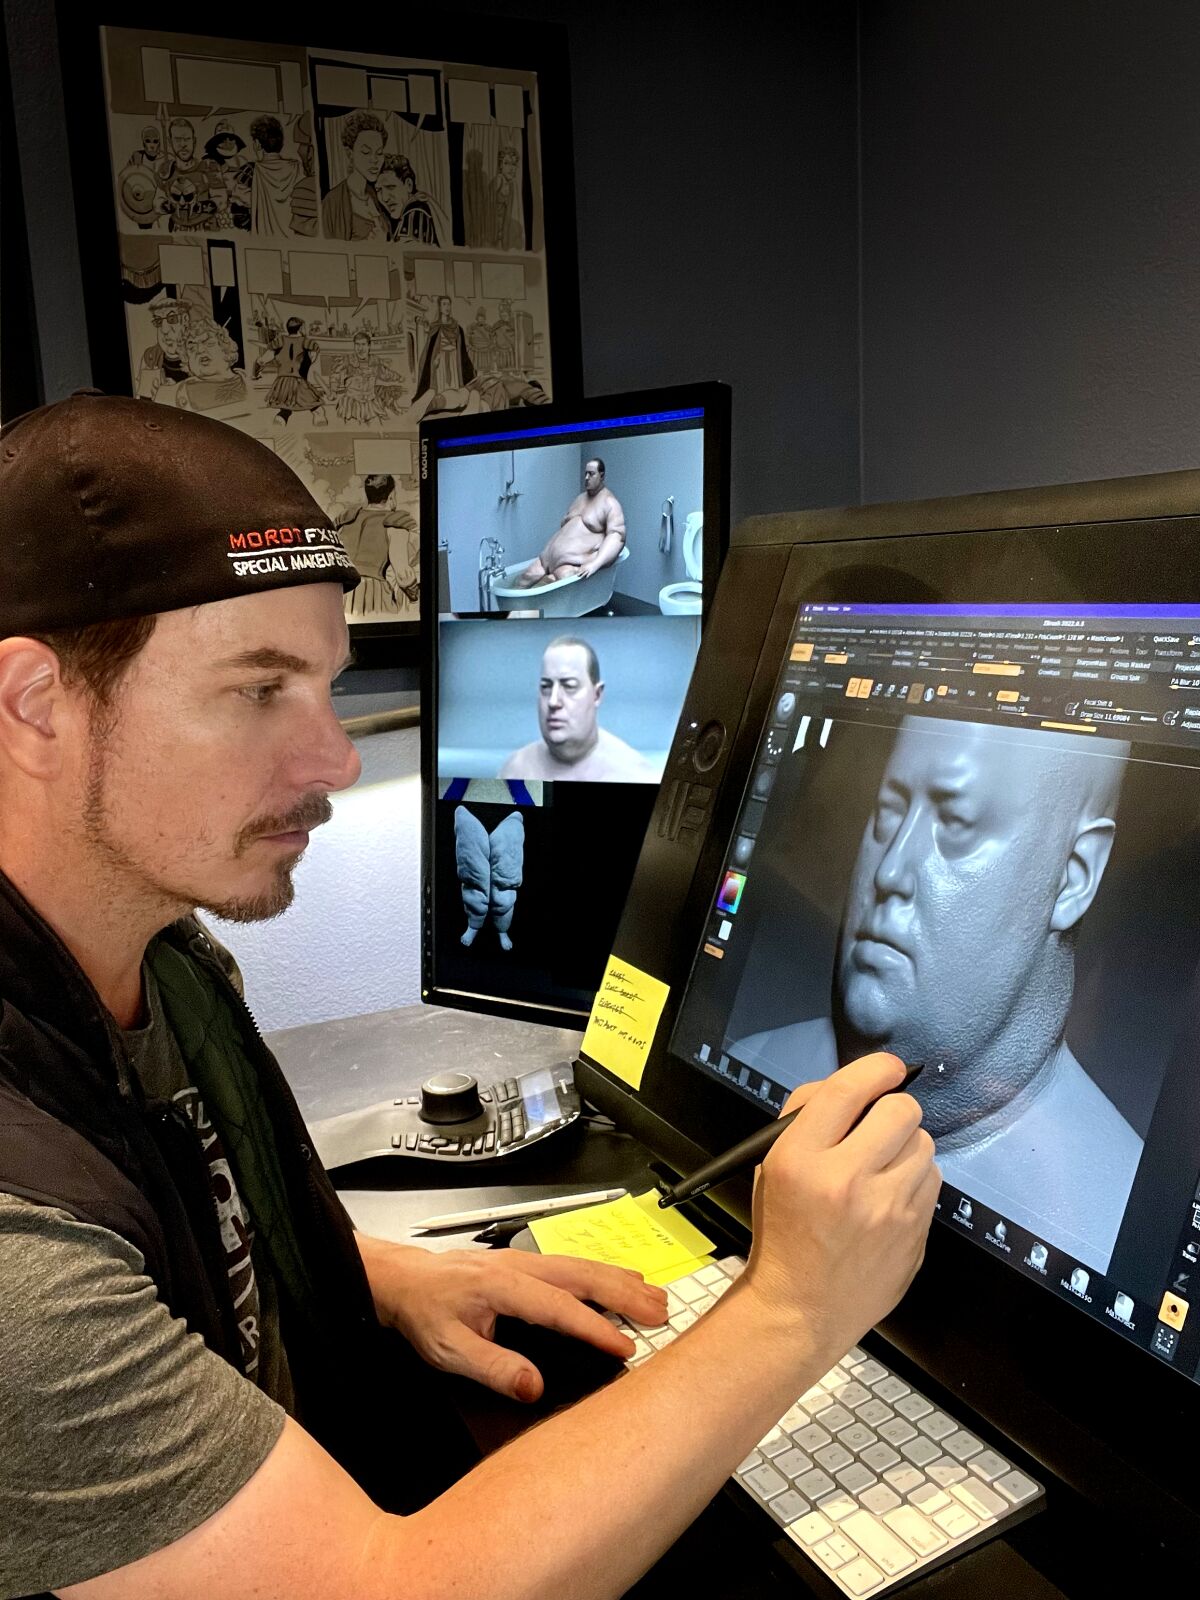 A man works on a computer image.